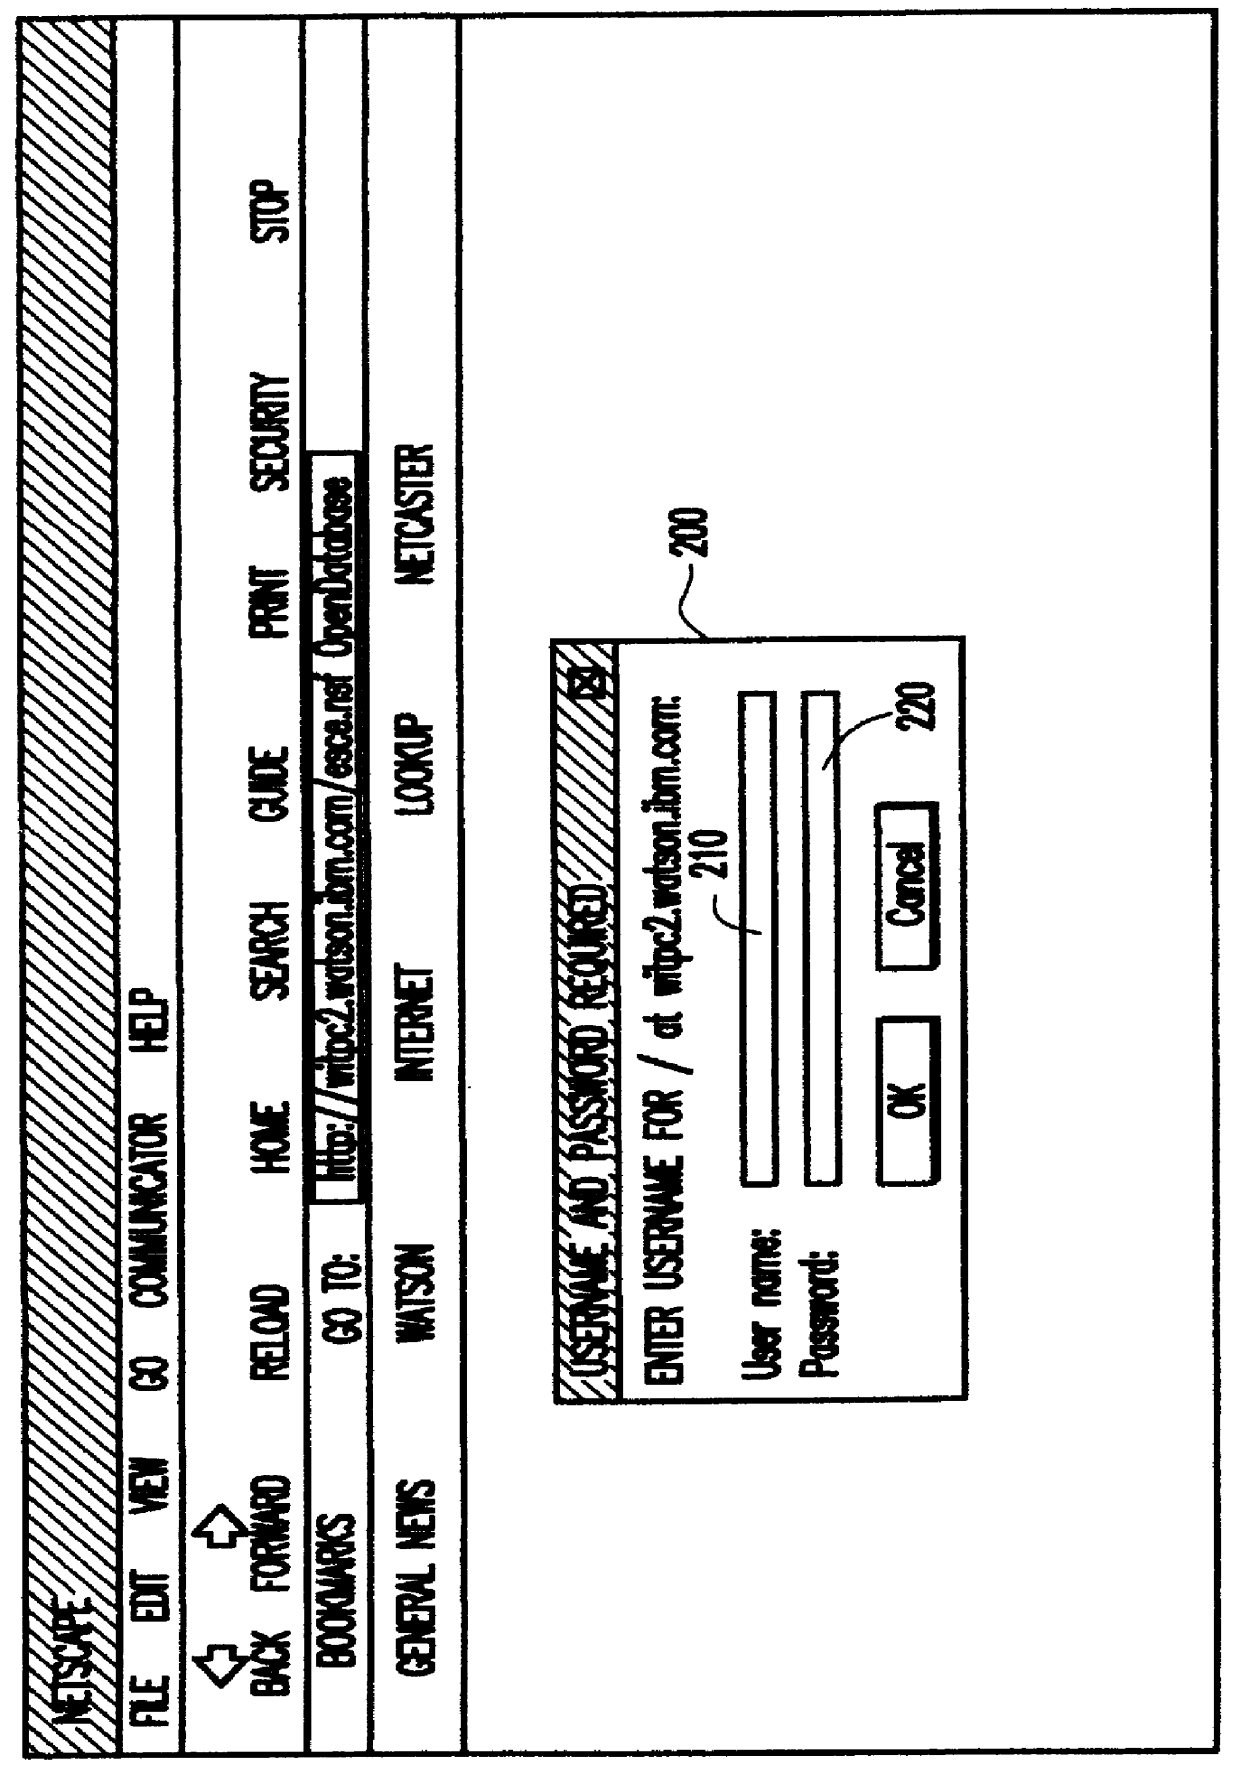 Method and apparatus for collaboratively managing supply chains